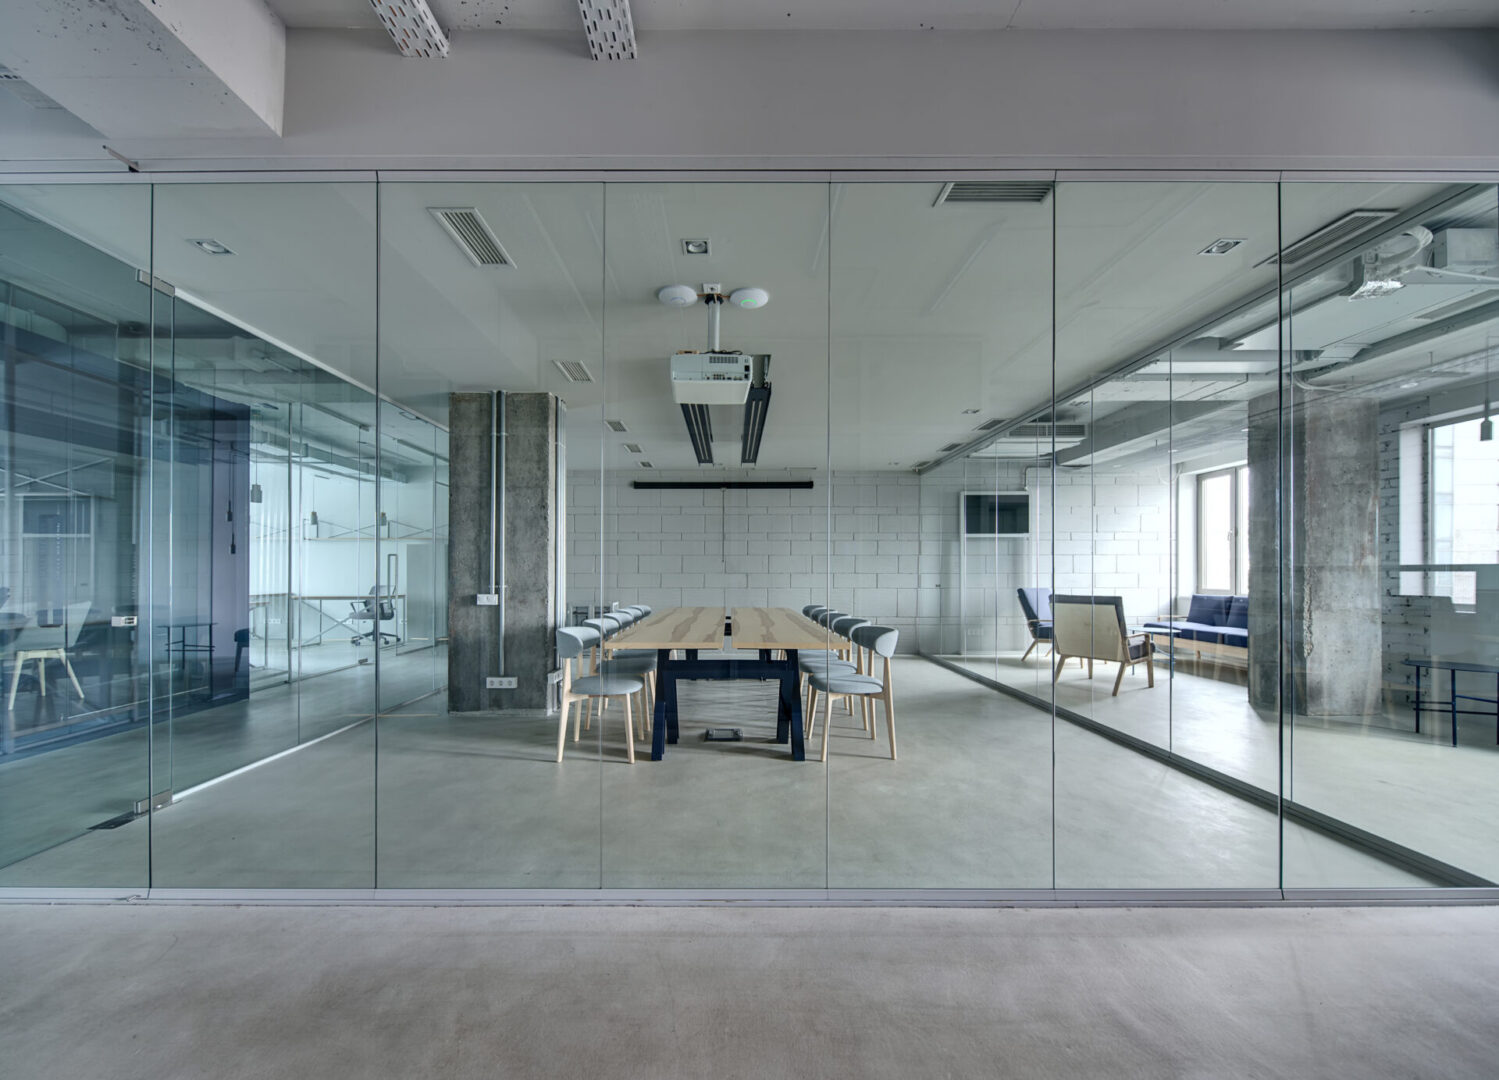 A room with glass walls and a table in the middle.